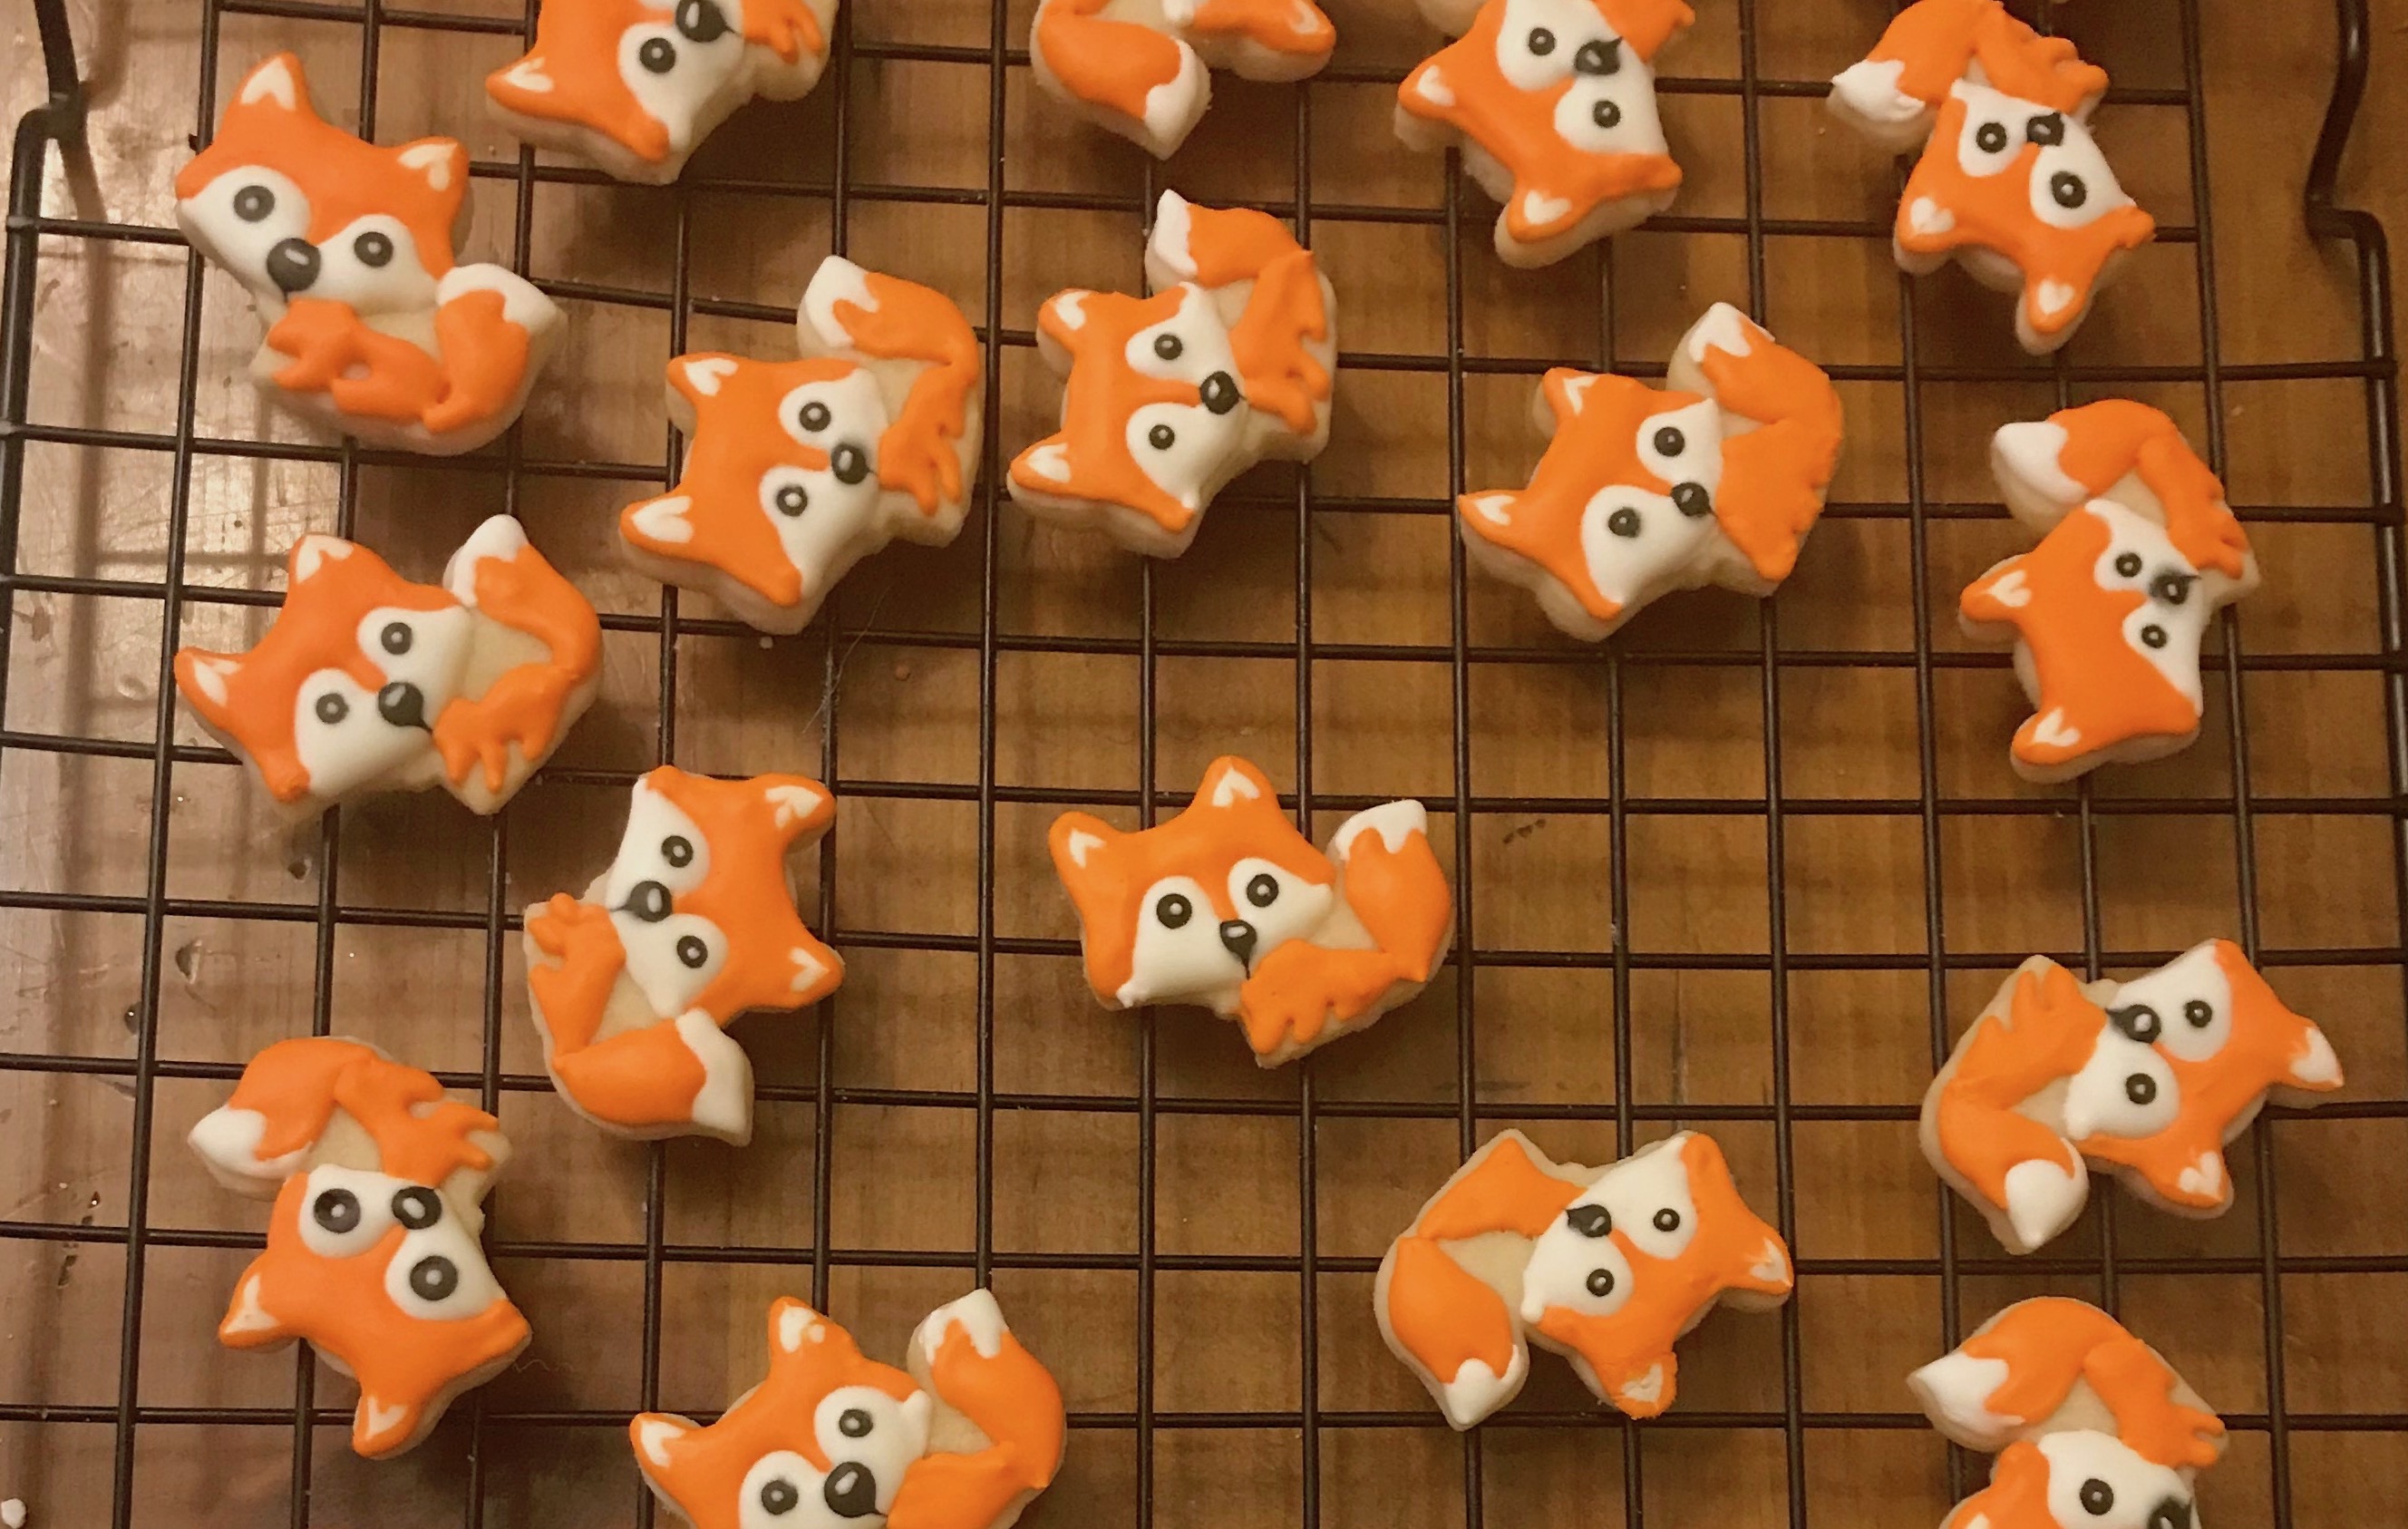 Learn how to create some adorable fox cookies with this easy DIY tutorial